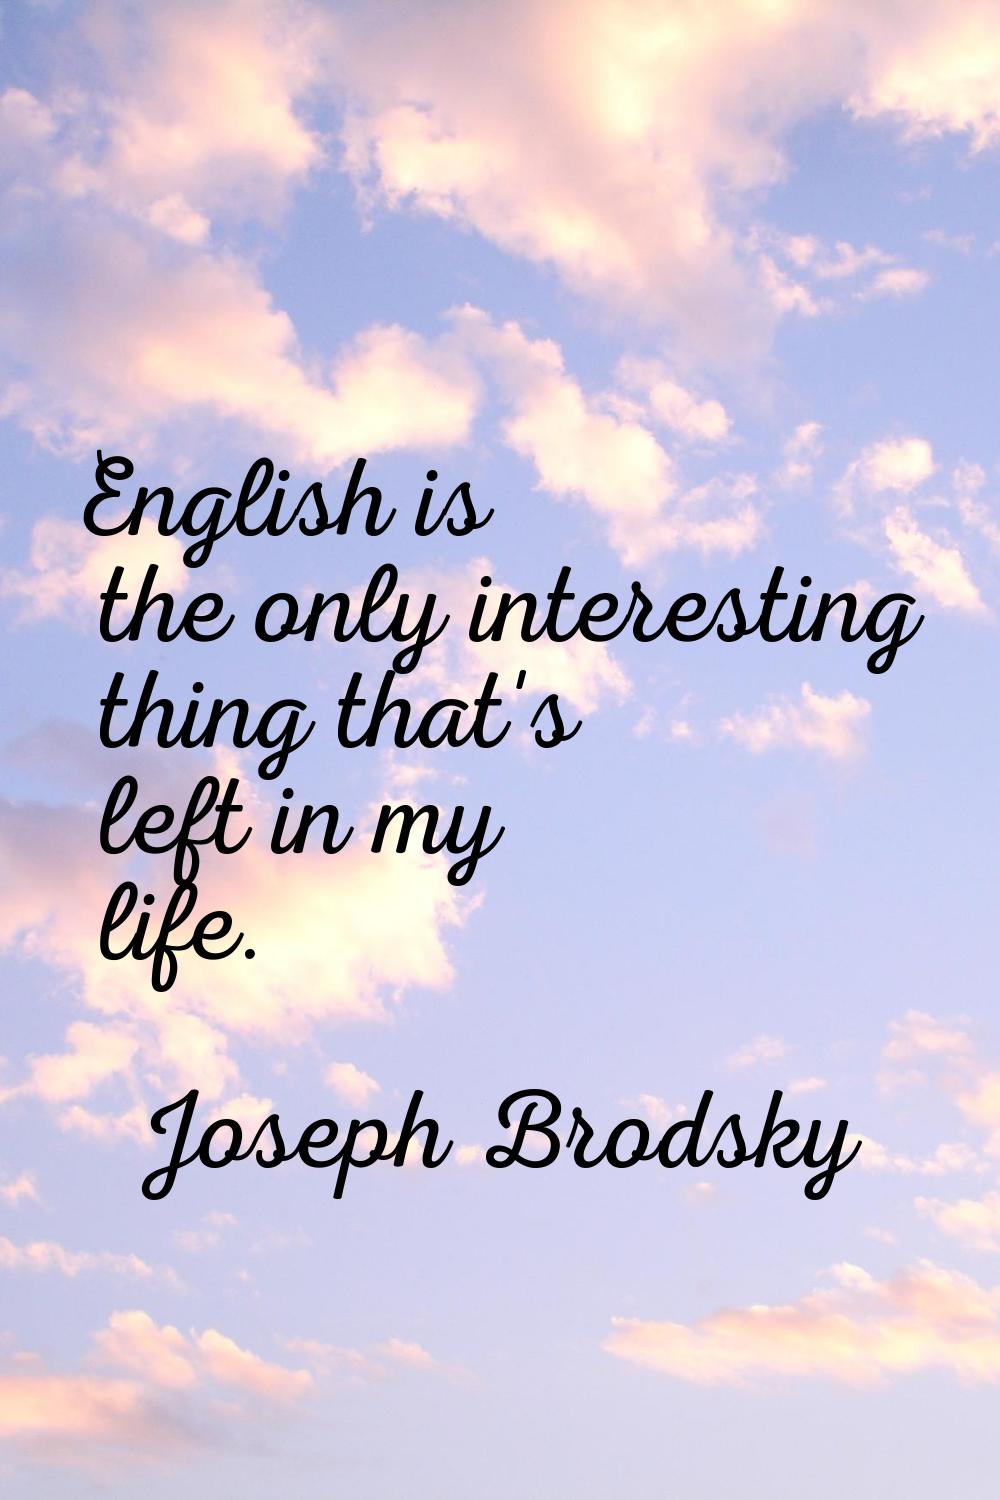 English is the only interesting thing that's left in my life.